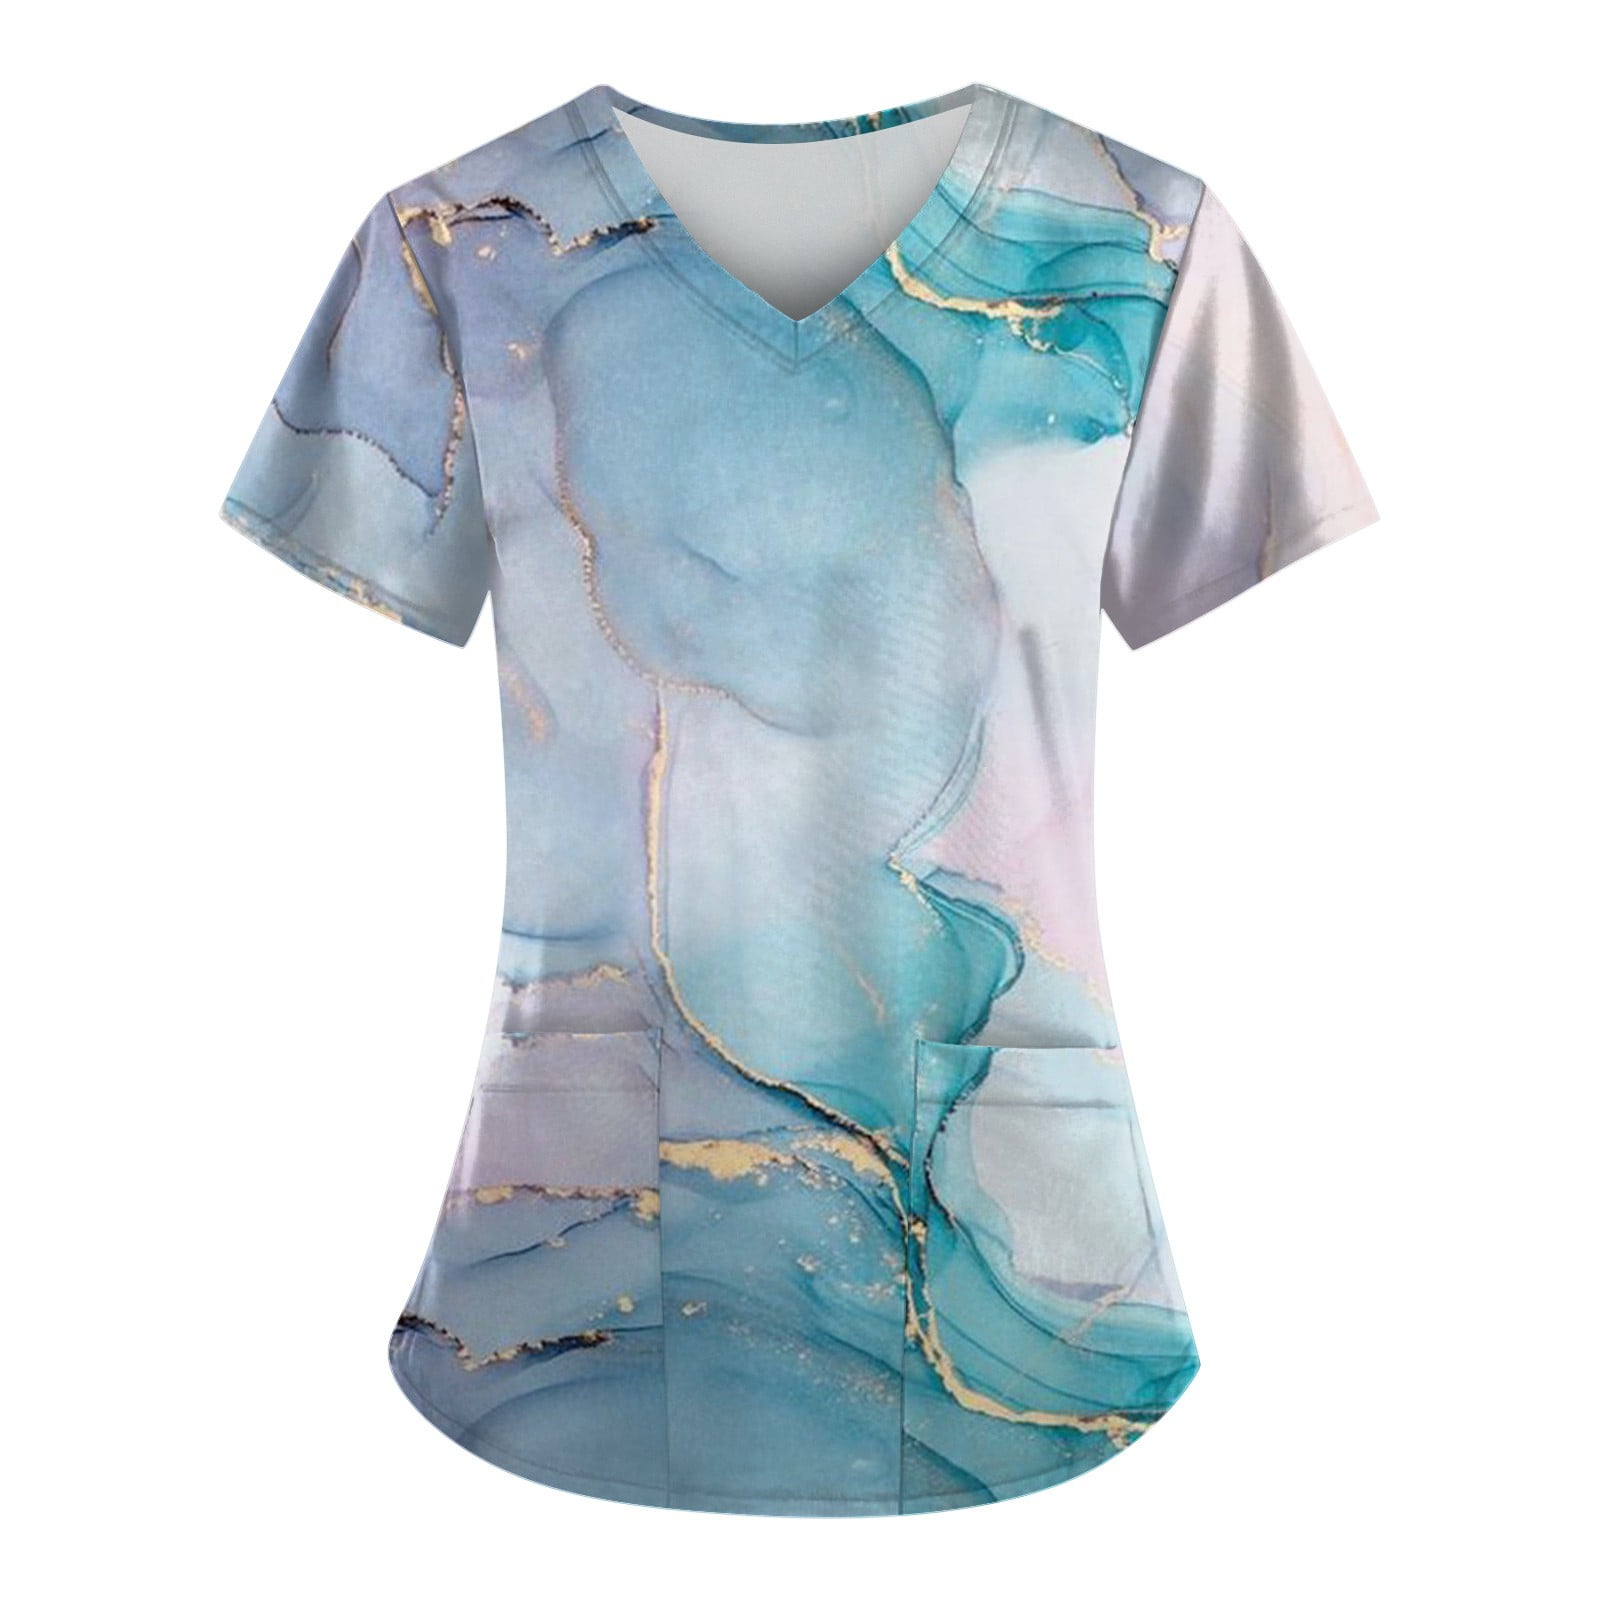 Kddylitq Printed Scrub Tops Women Short Sleeve Marble Print with ...